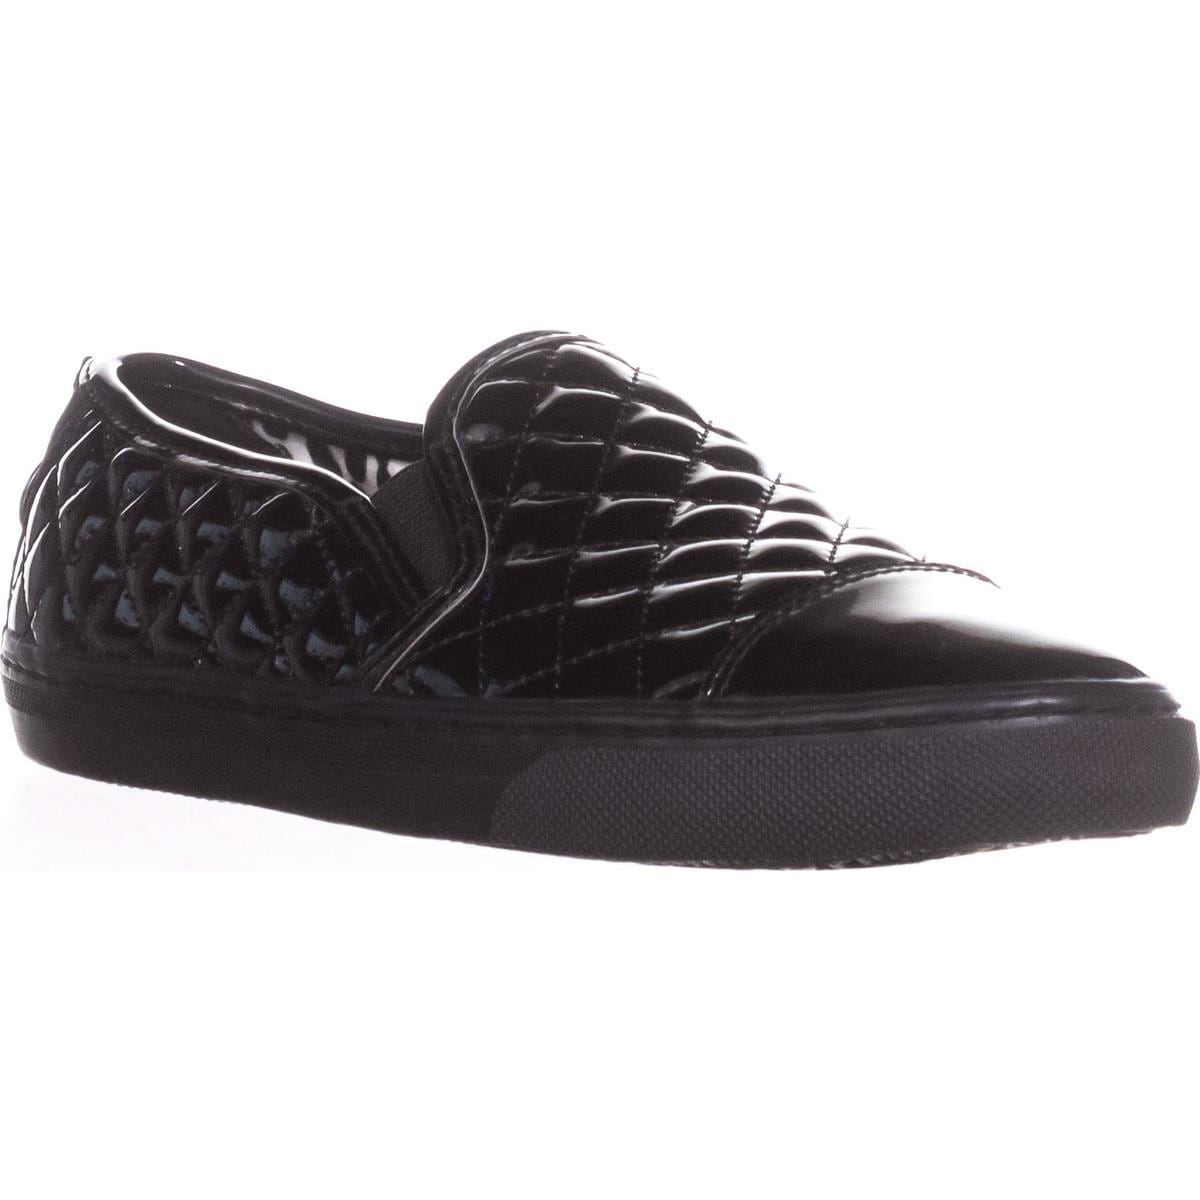 Shop GEOX New Club Slip-On Fashion Sneakers, Black - Overstock - 20519777